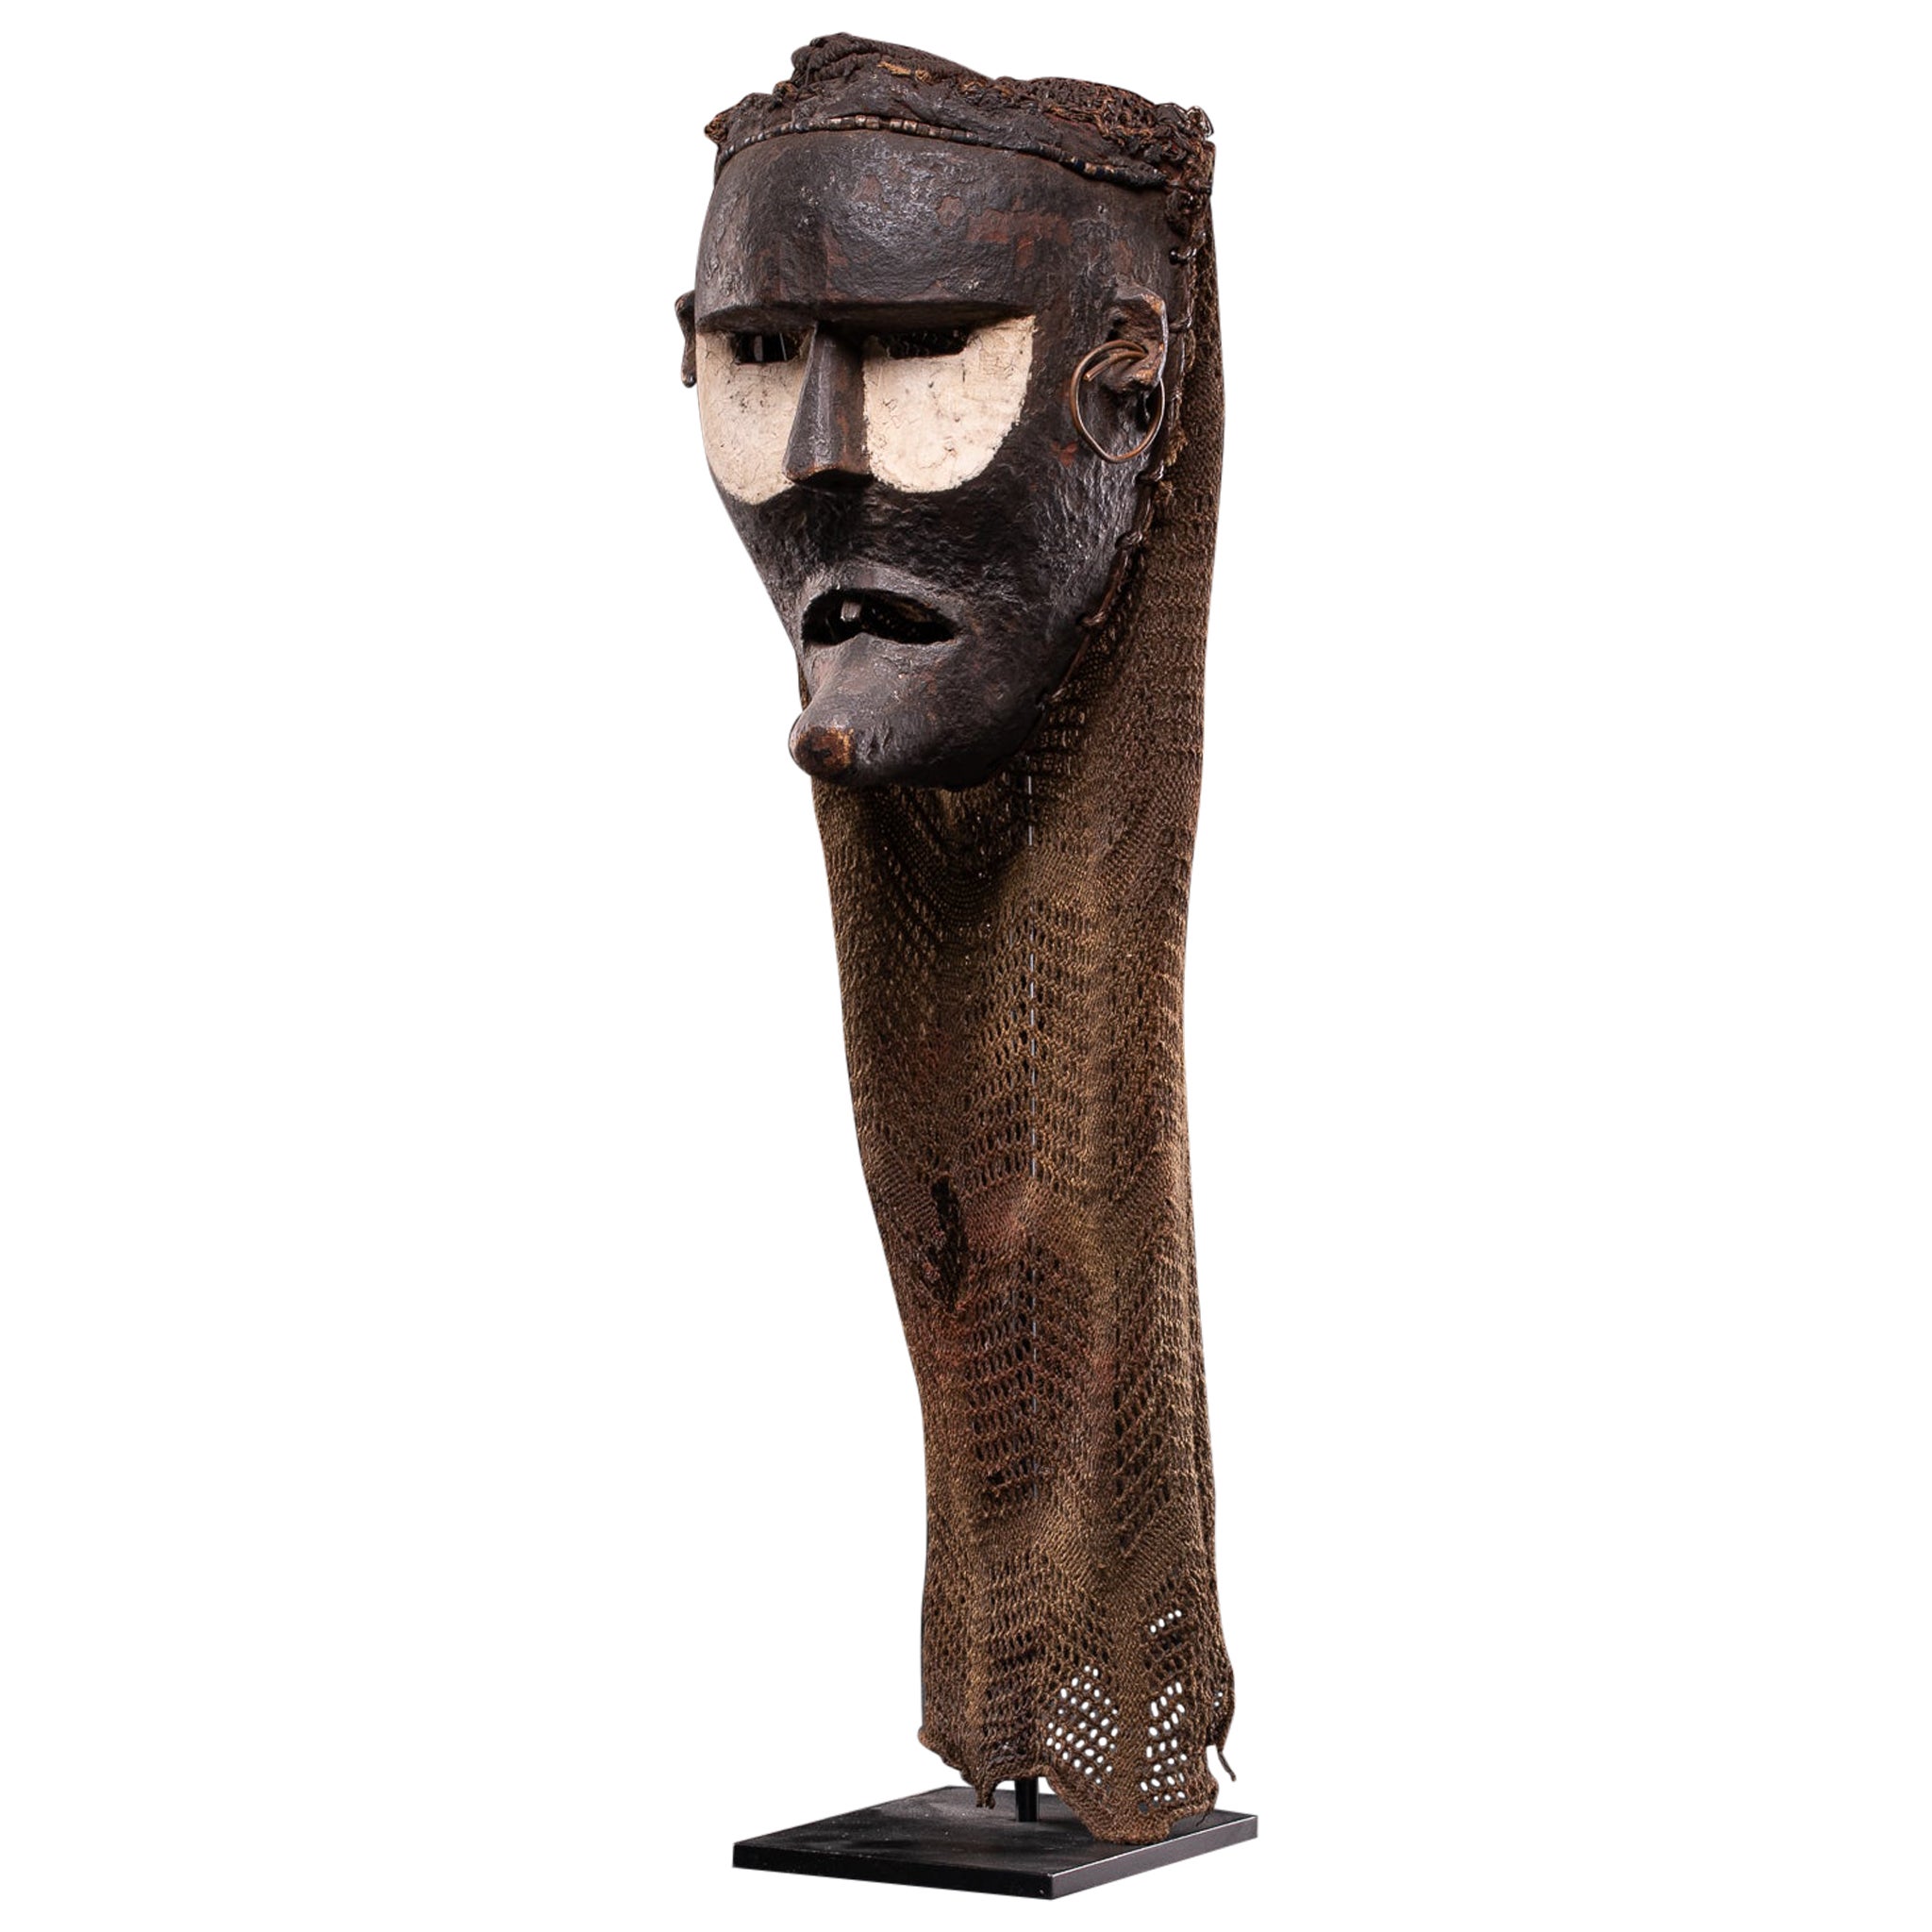 Ethnodesign Katoyo Mask representing the "Foreigner" with headdress from Angola. For Sale